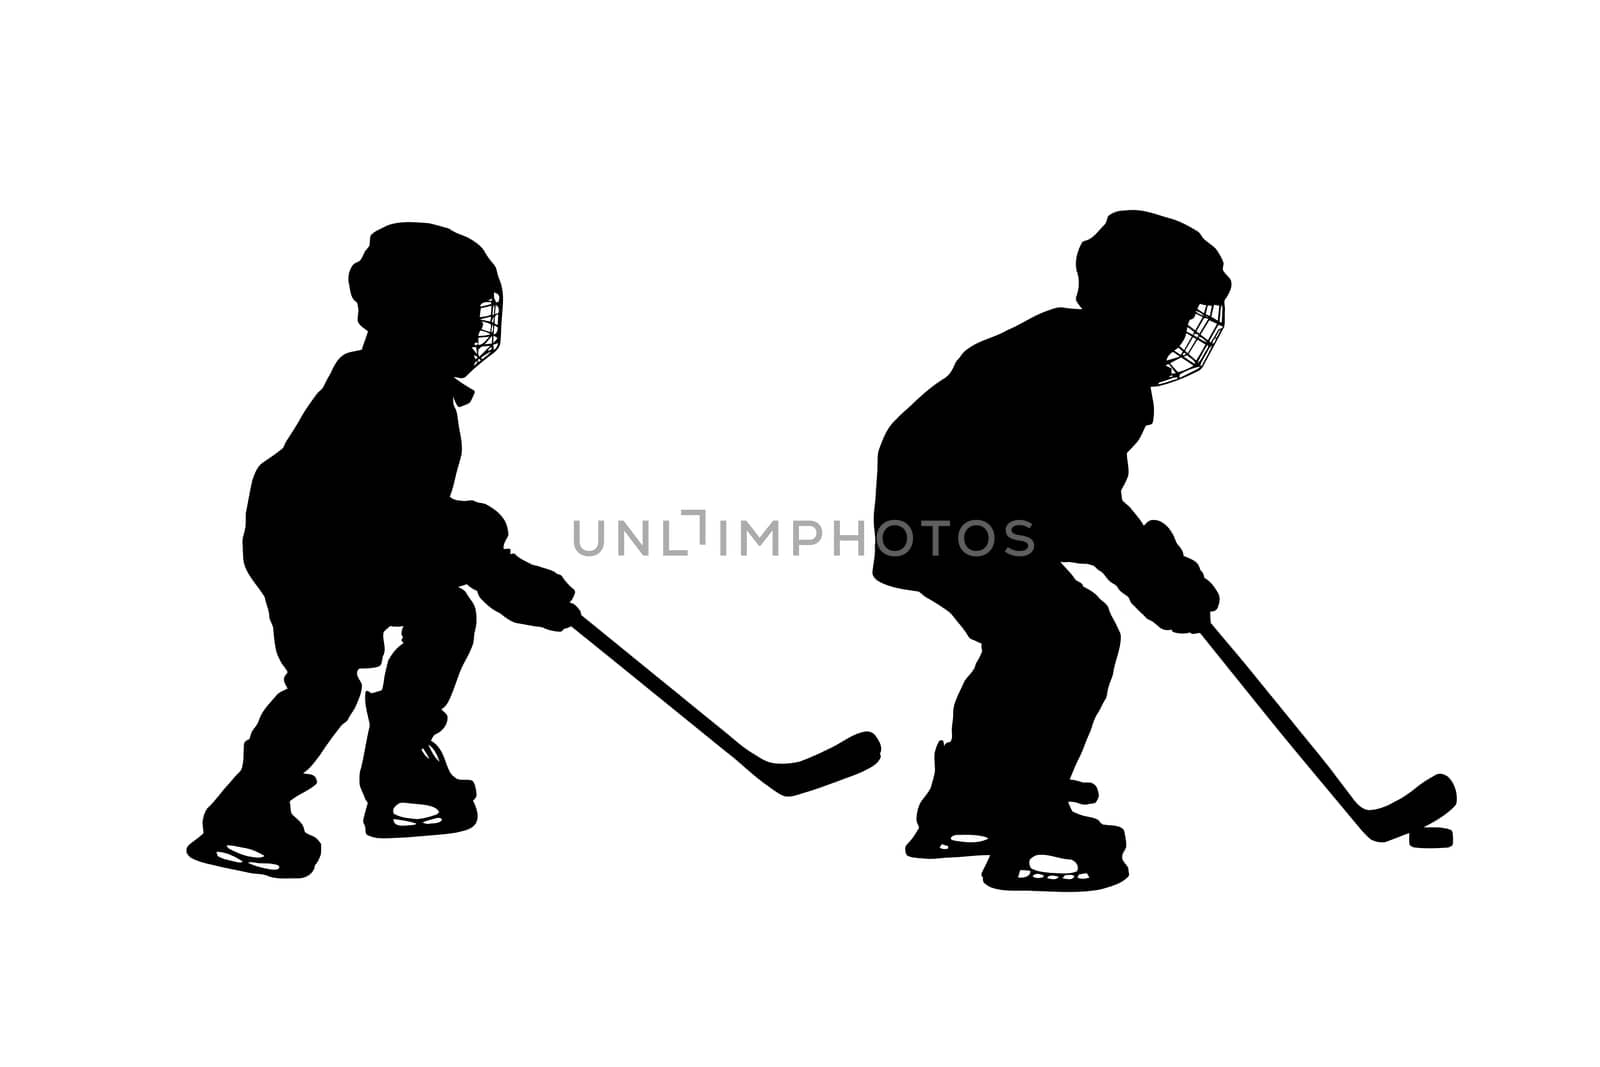 Silhouettes of two hockey players, isolated on white background.